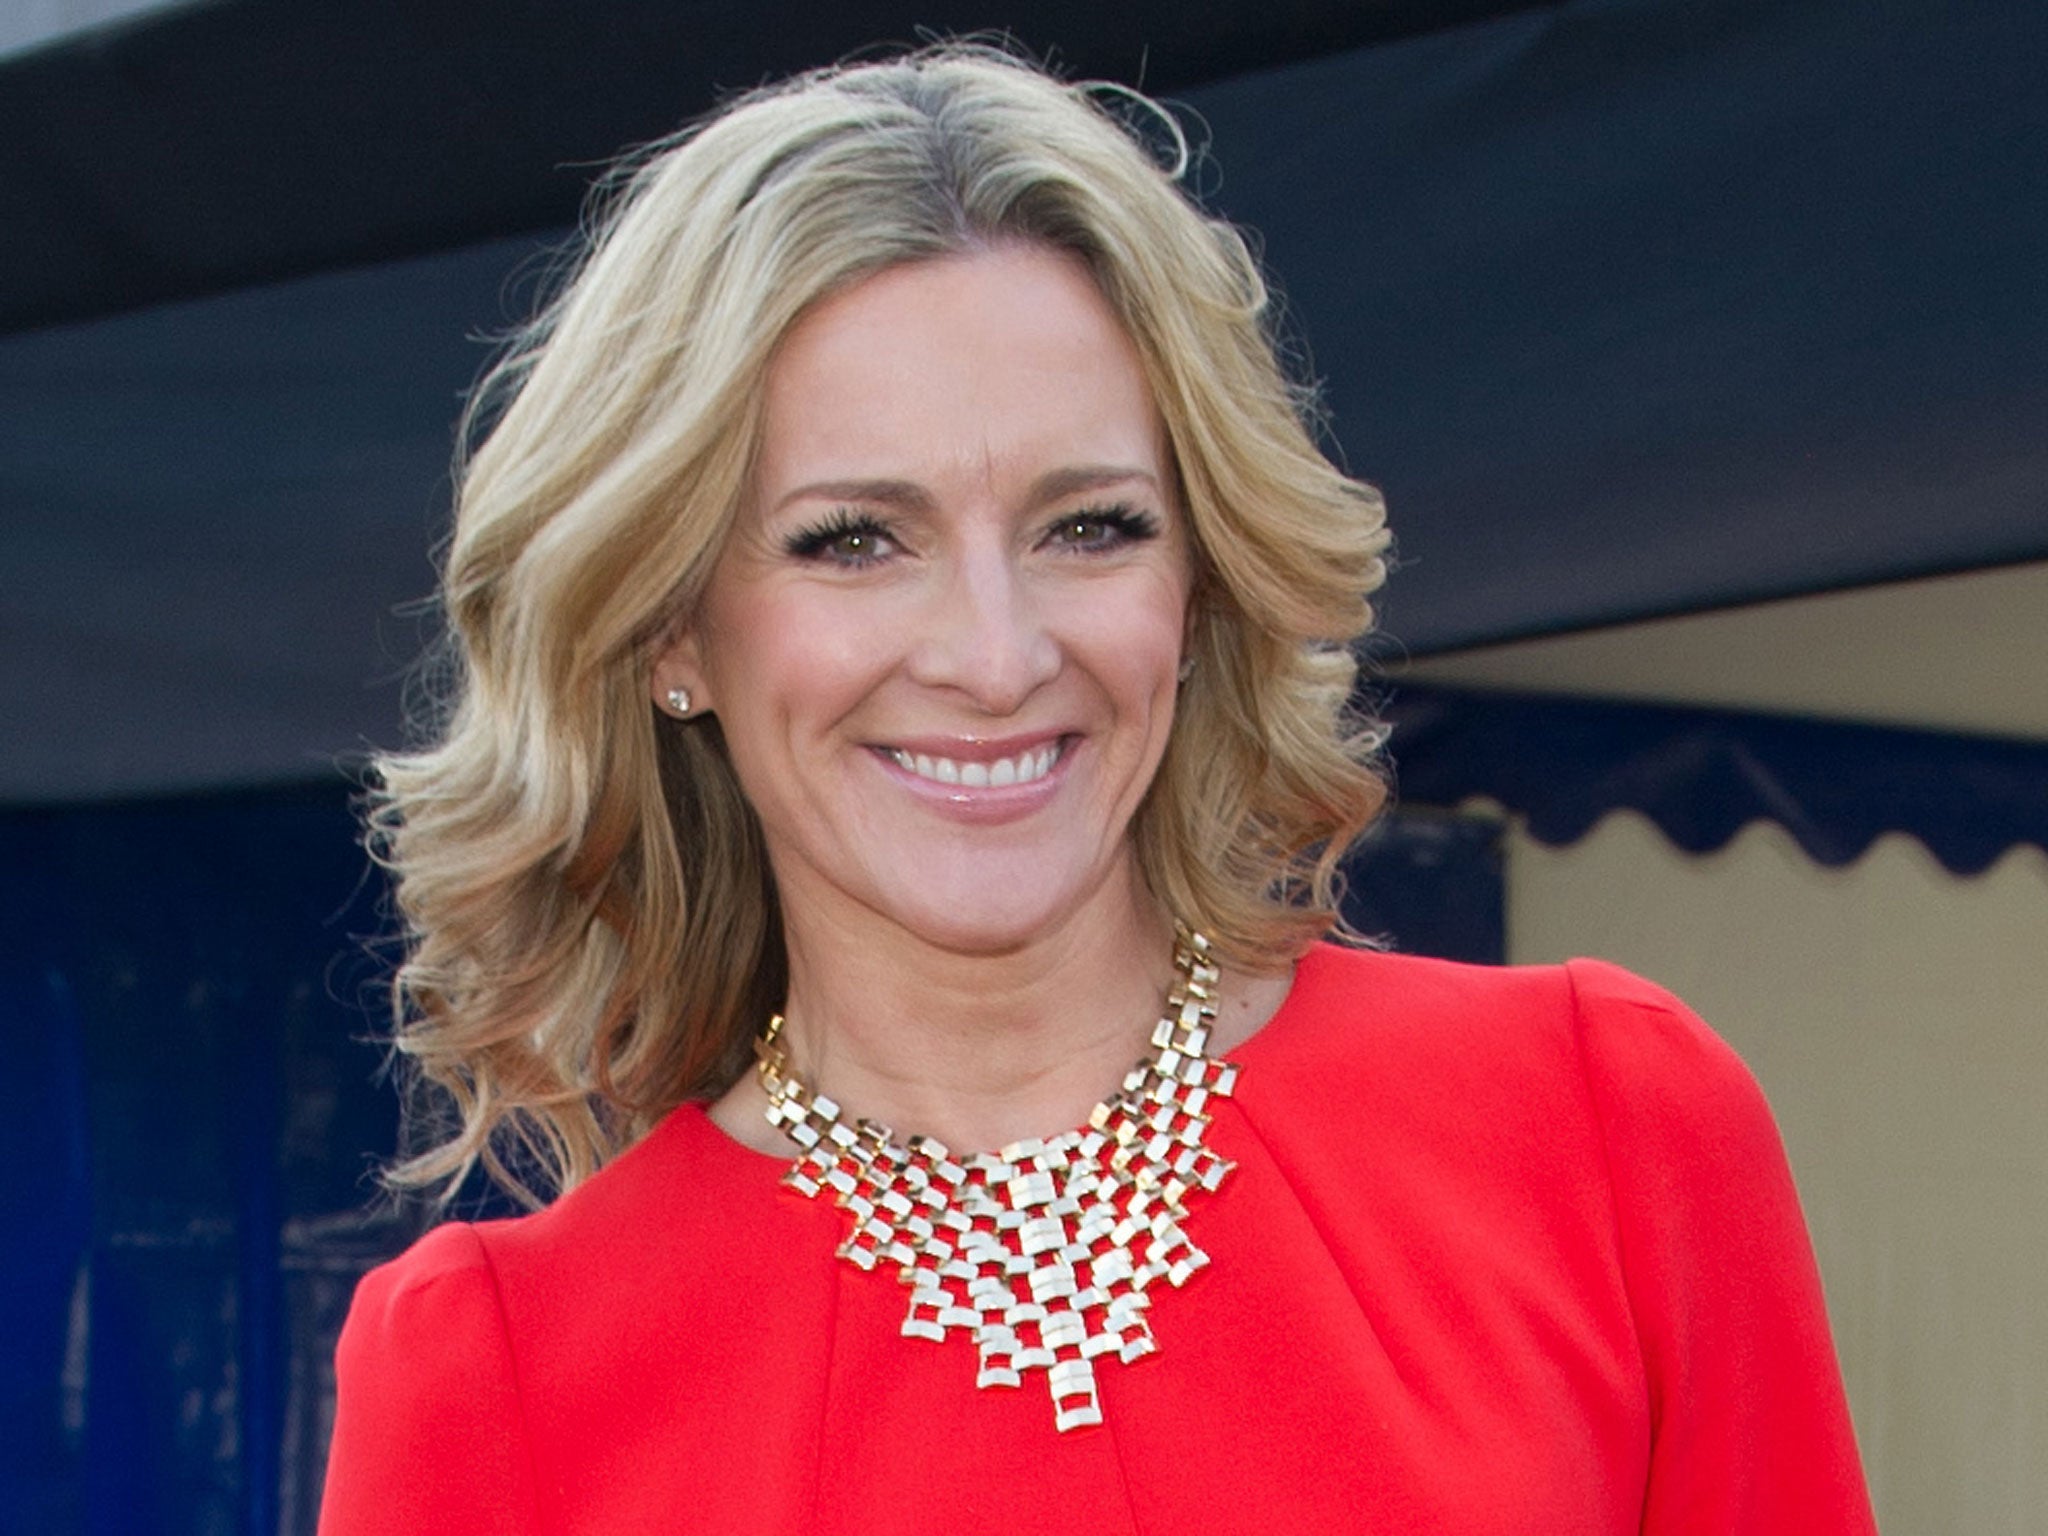 Gabby Logan has over 370,000 followers on her Twitter account